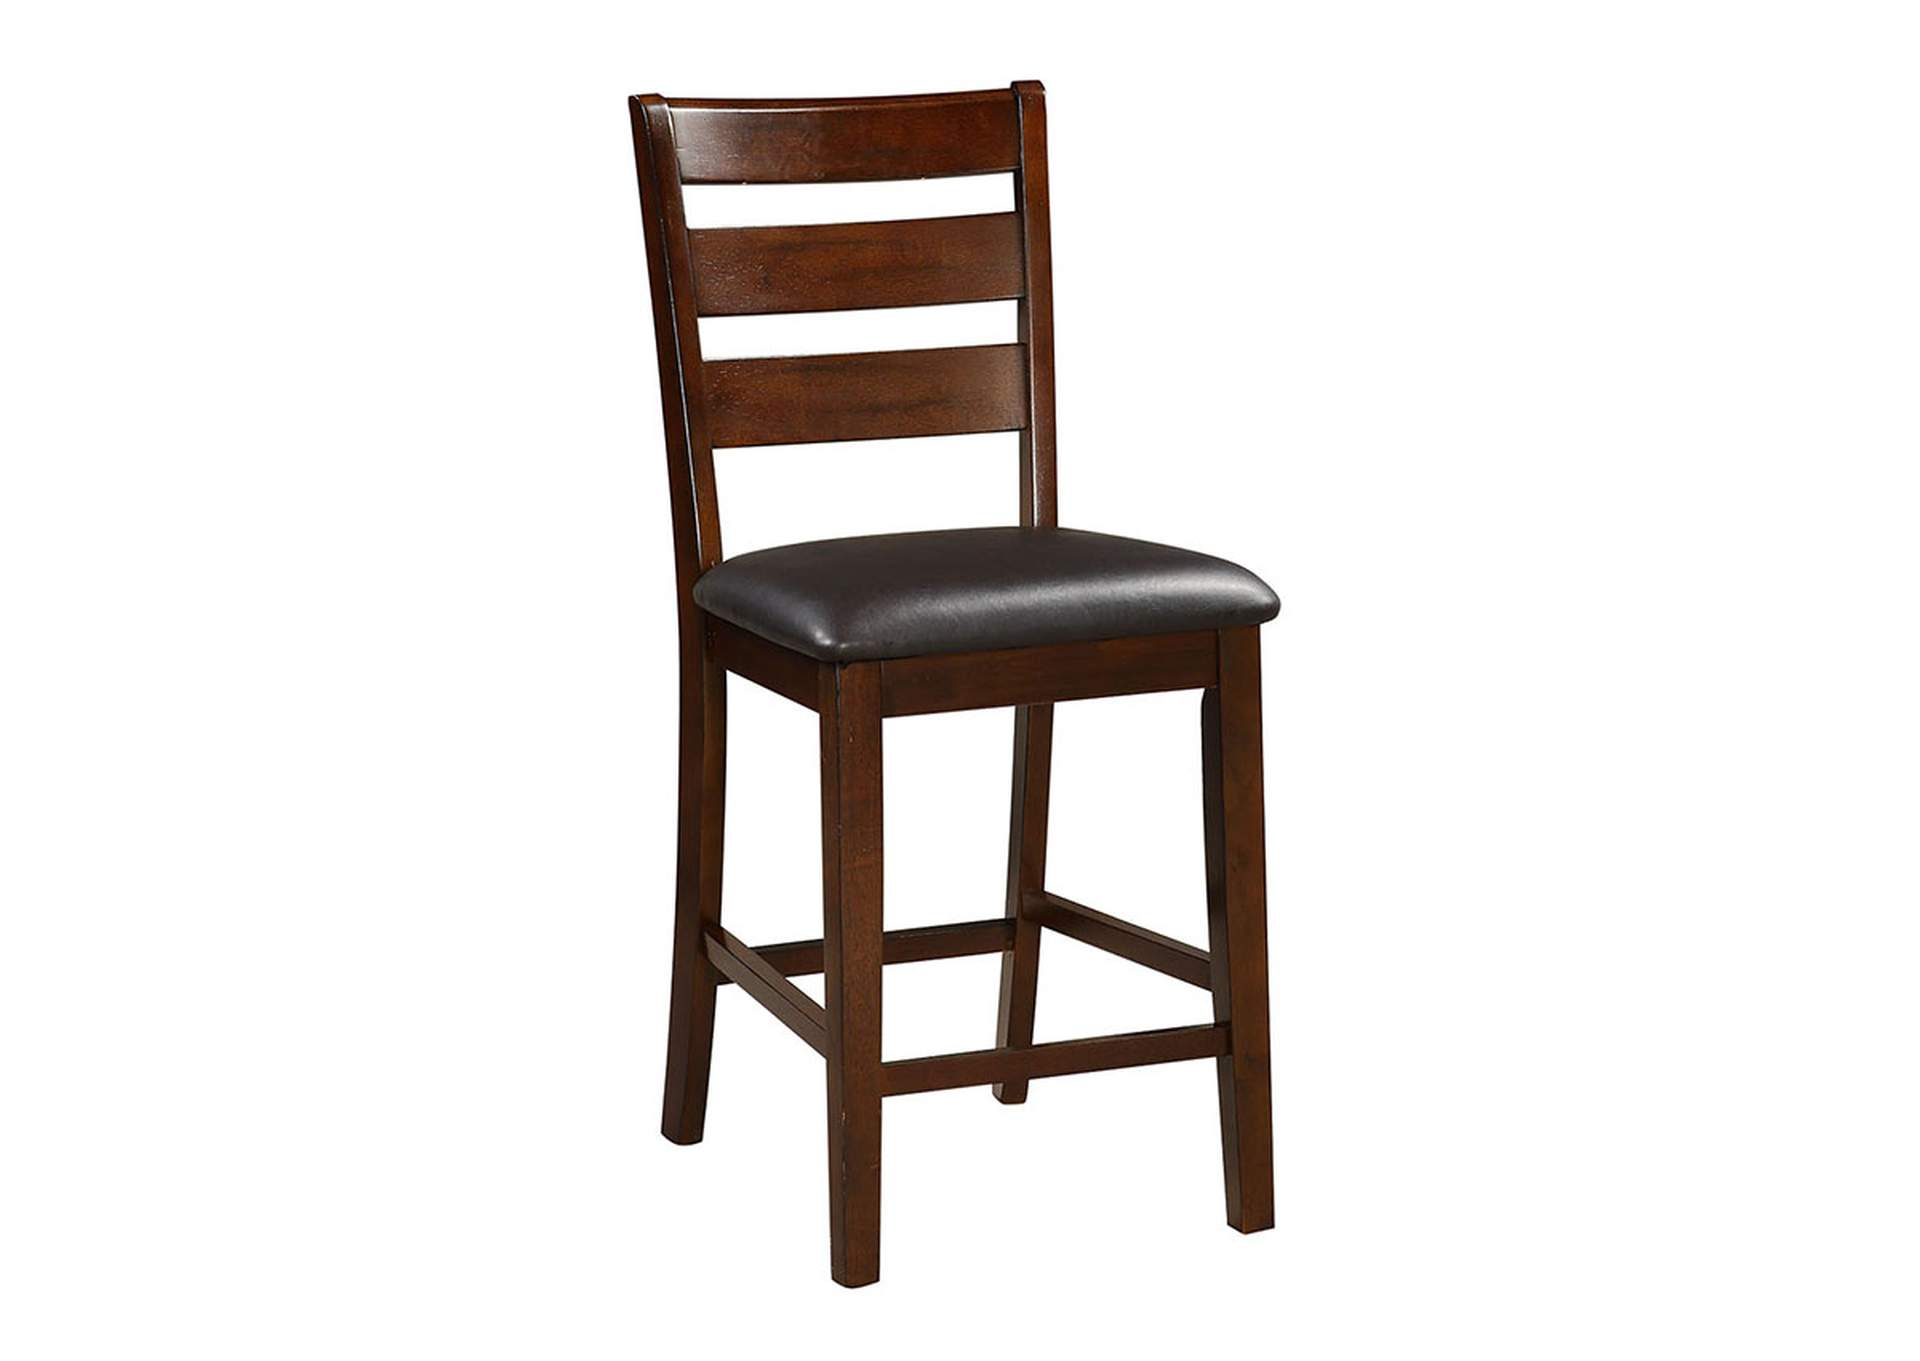 Dining High Chair,Poundex